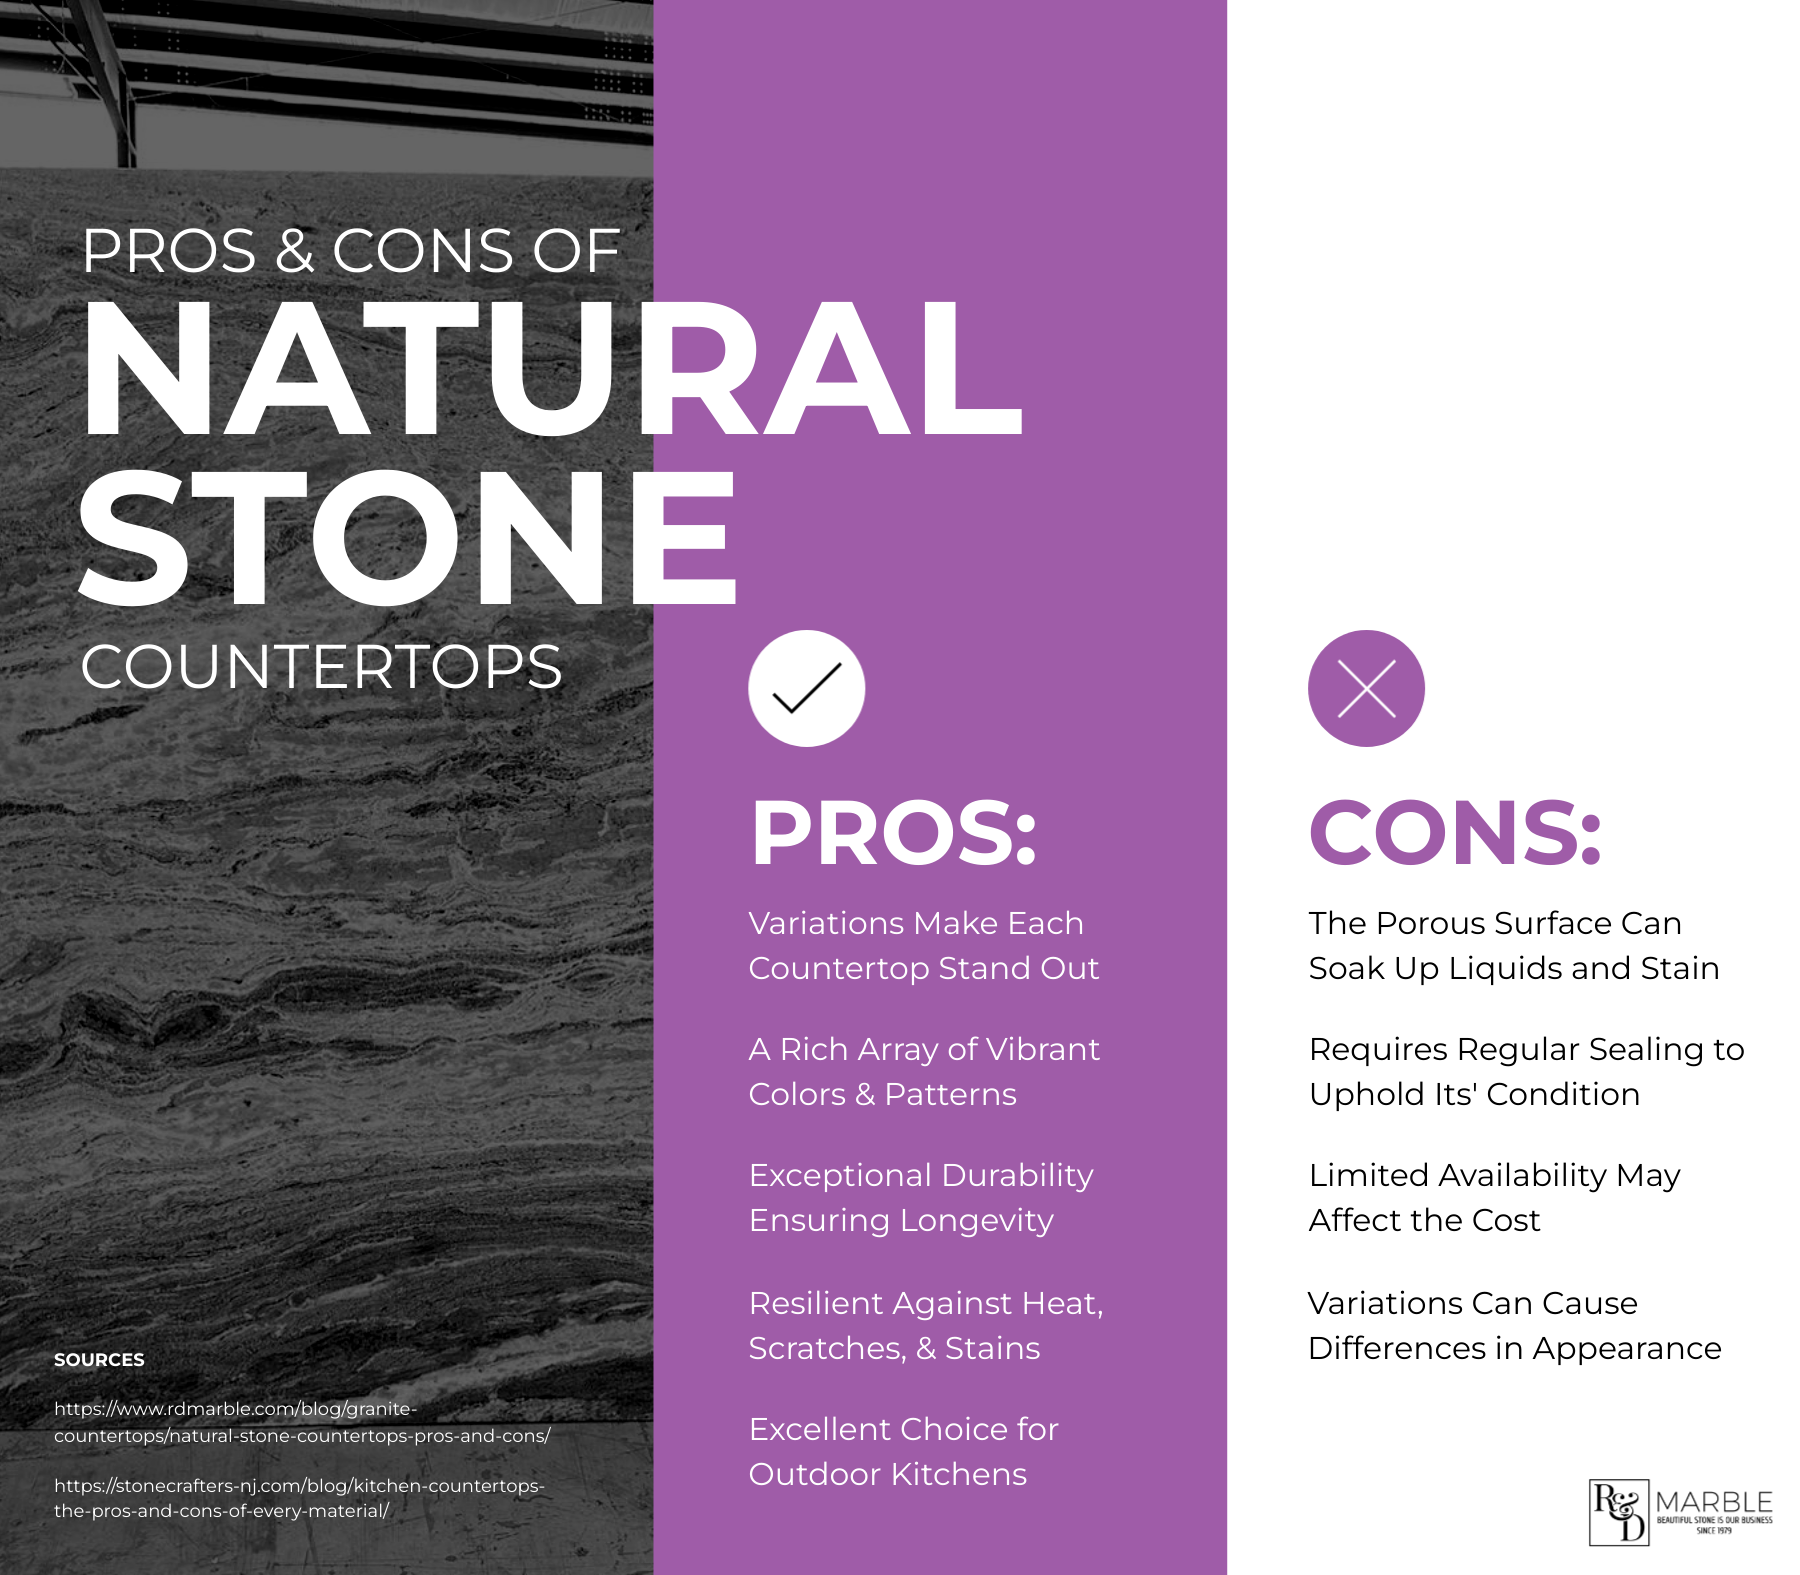 Natural Stone Pros and Cons Infographic by Rd Marble